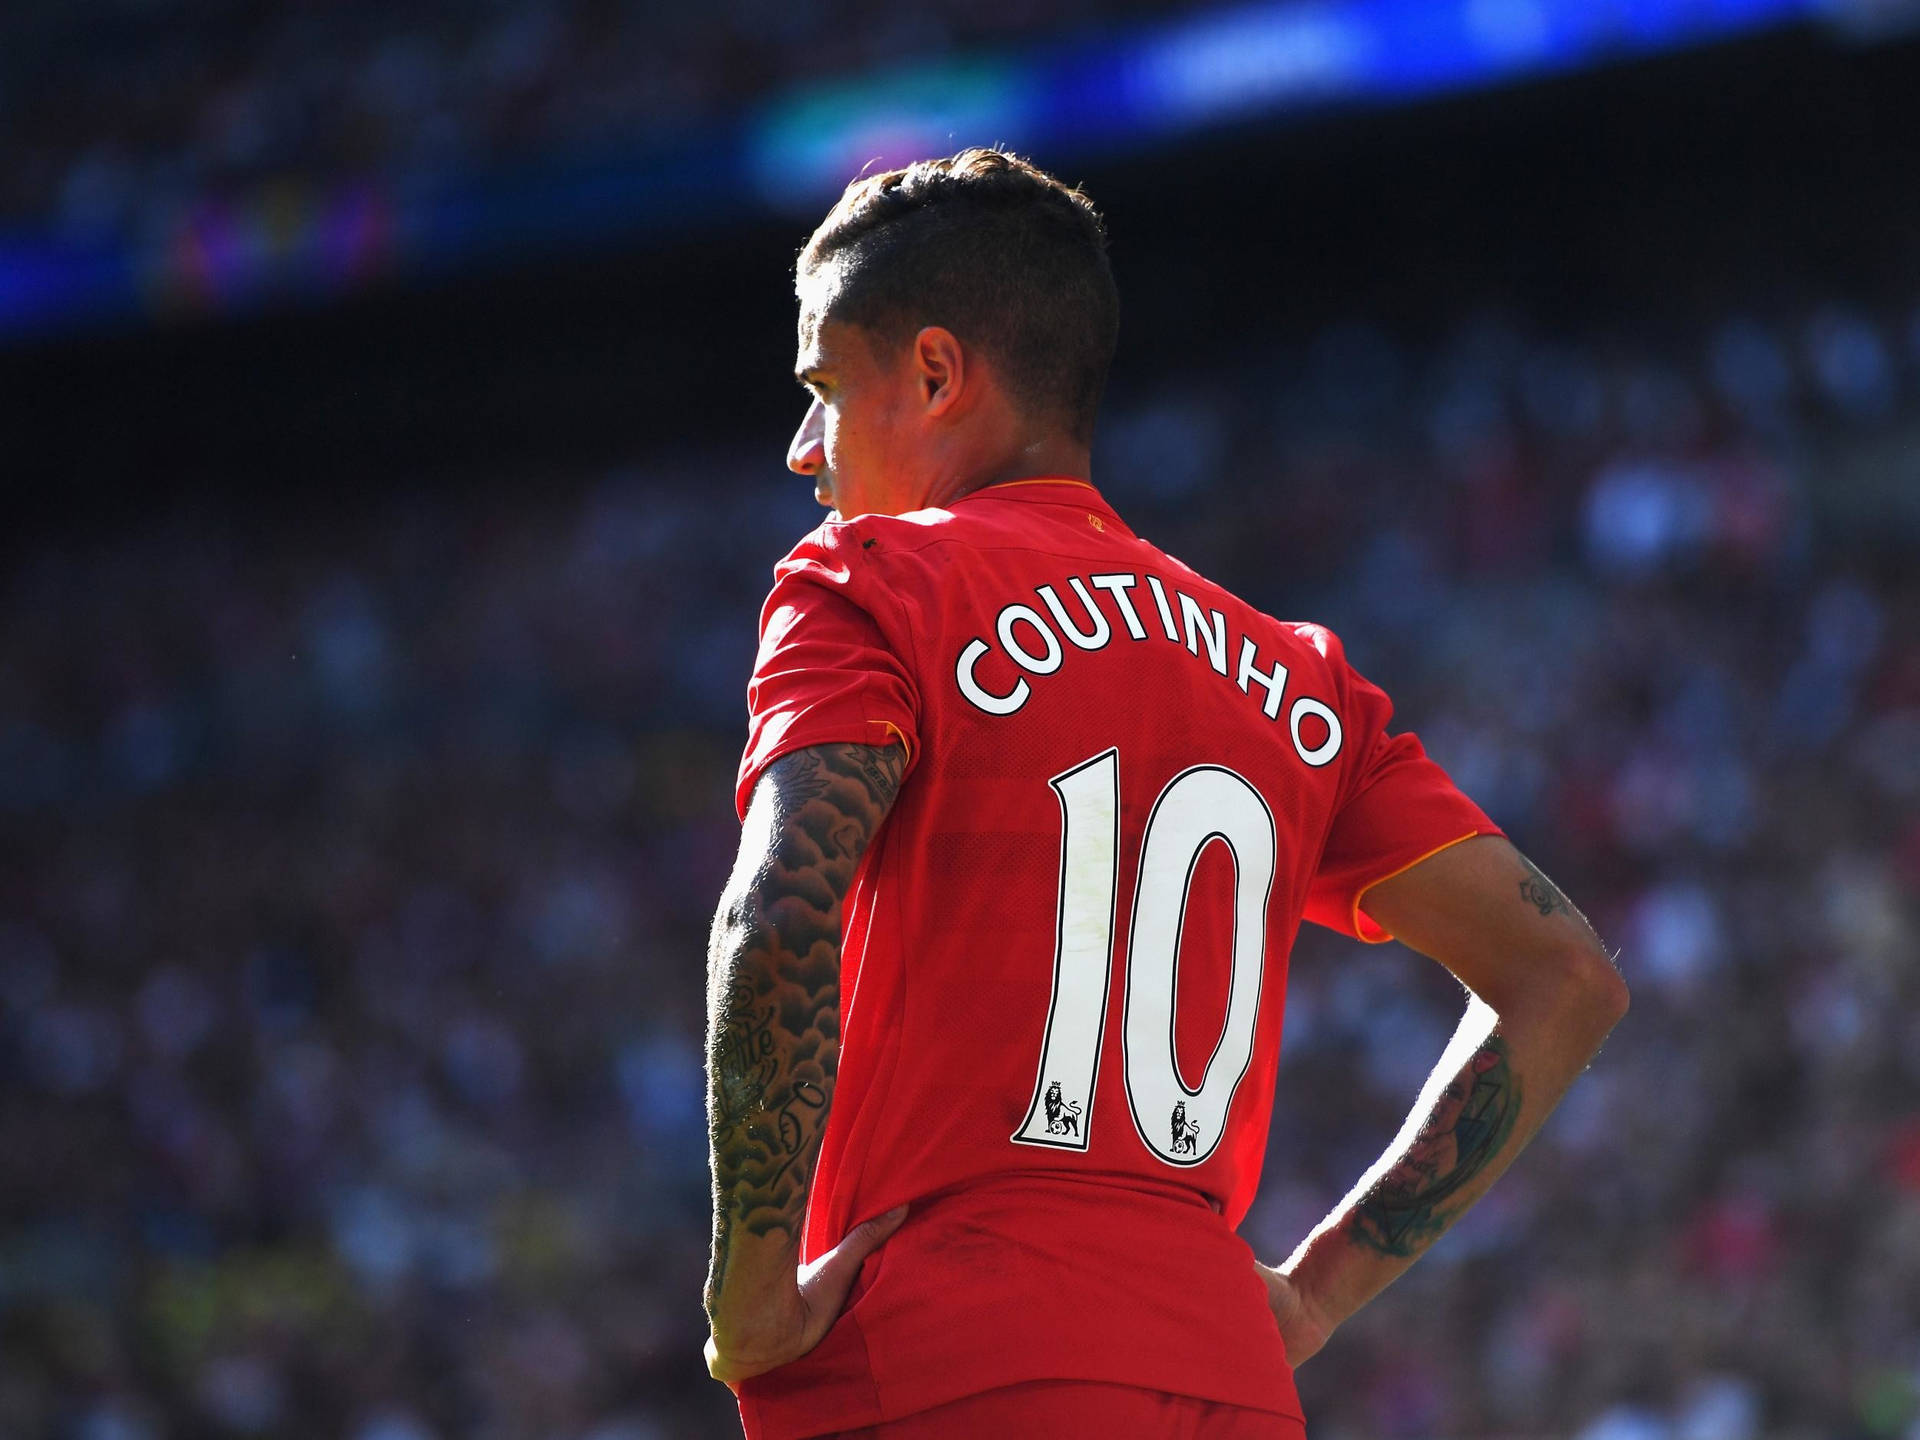 Philippe Coutinho No. 10 Jersey Background